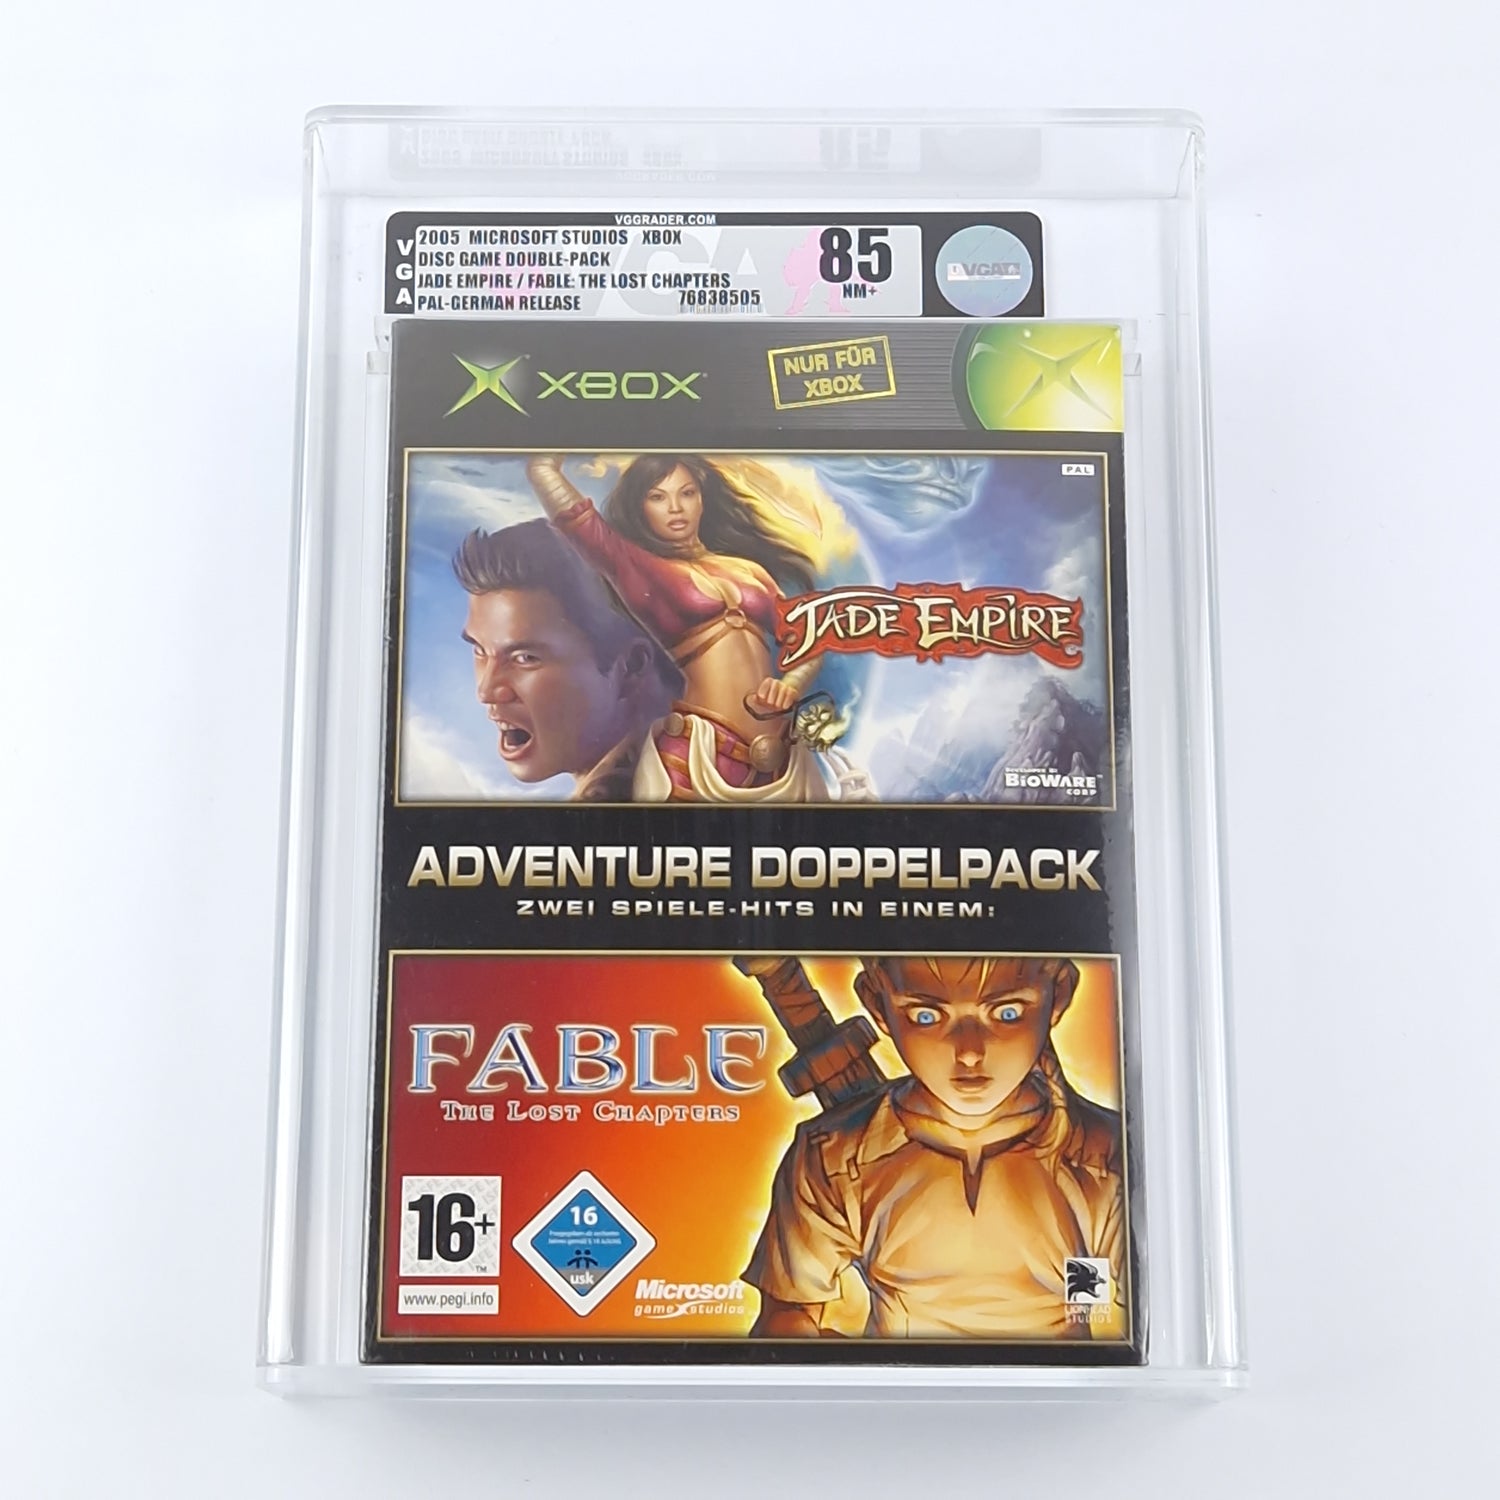 Xbox Classic Game: Adventure Double Pack - Fable & Jade Empire | VGA grading 85